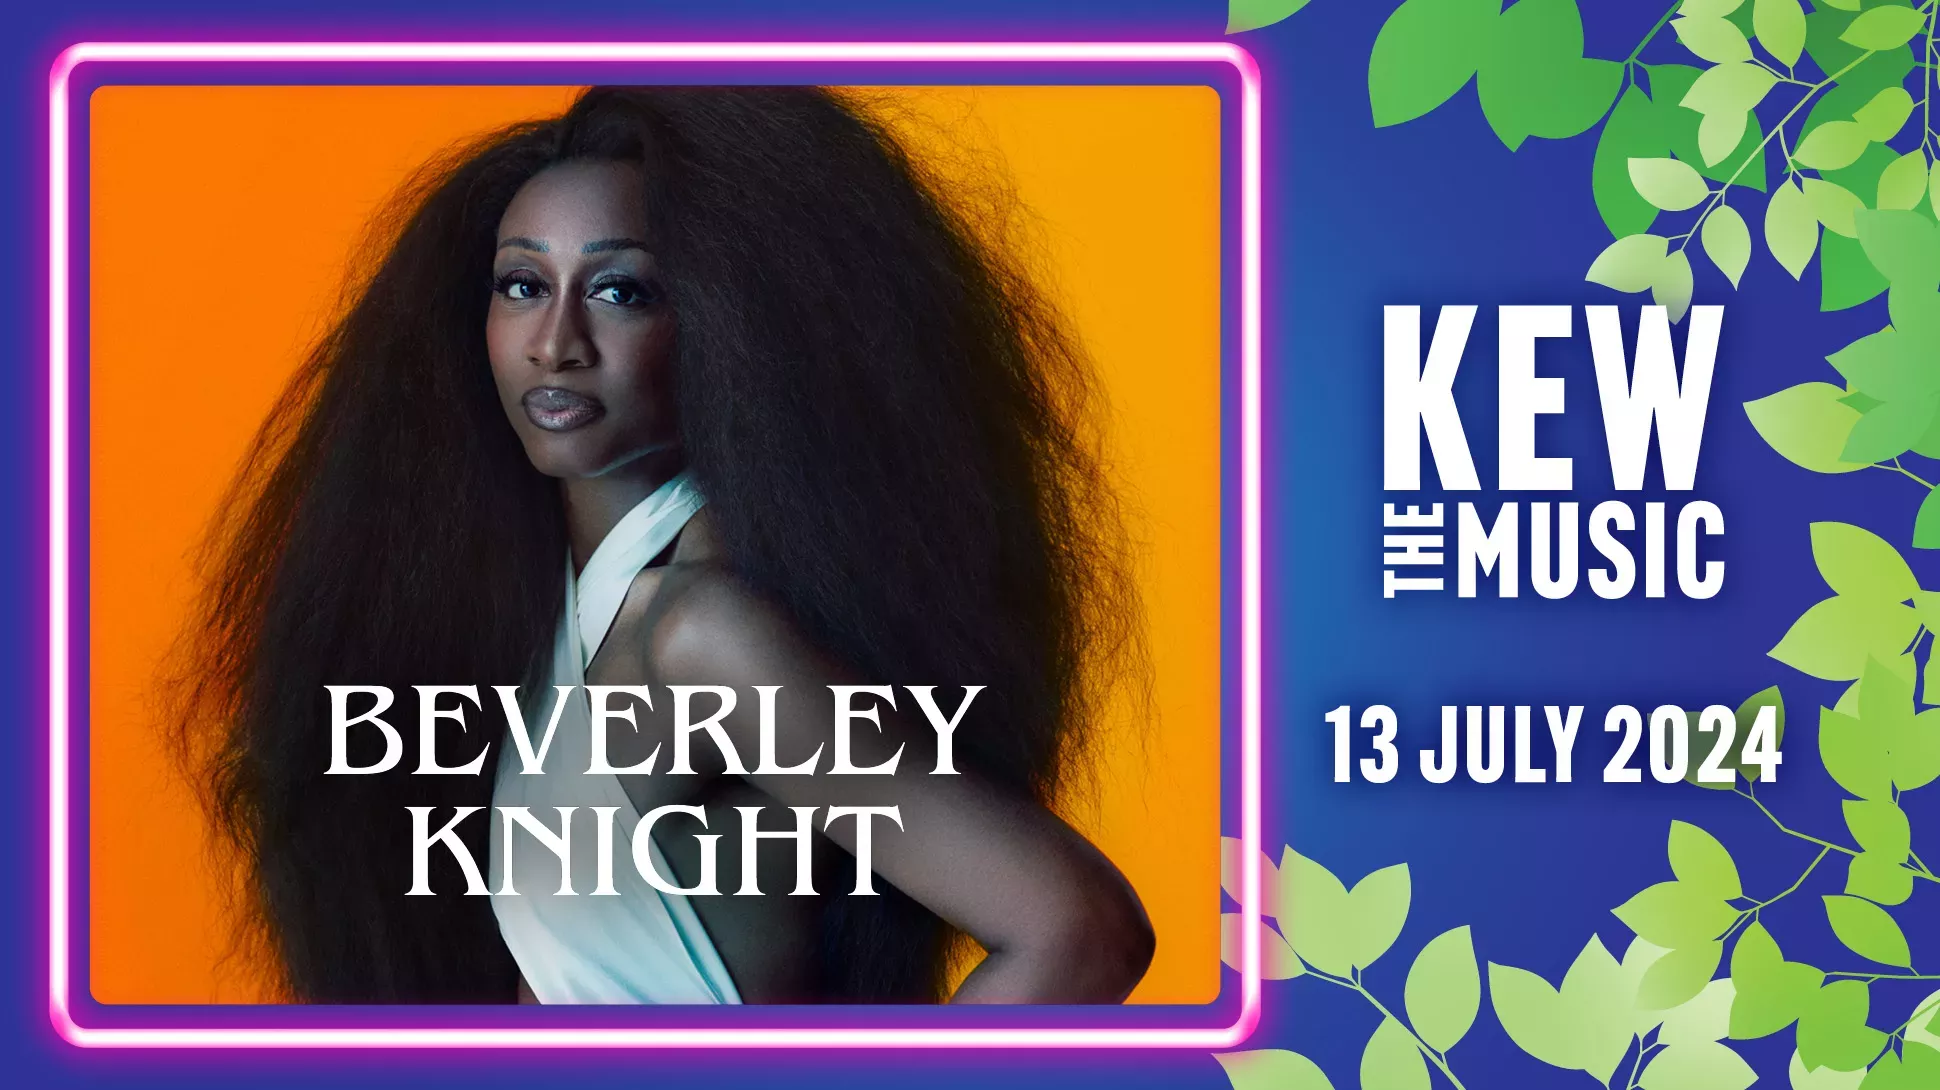 Publicity shot of Beverley Knight with text: Kew the Music 13 July 2024